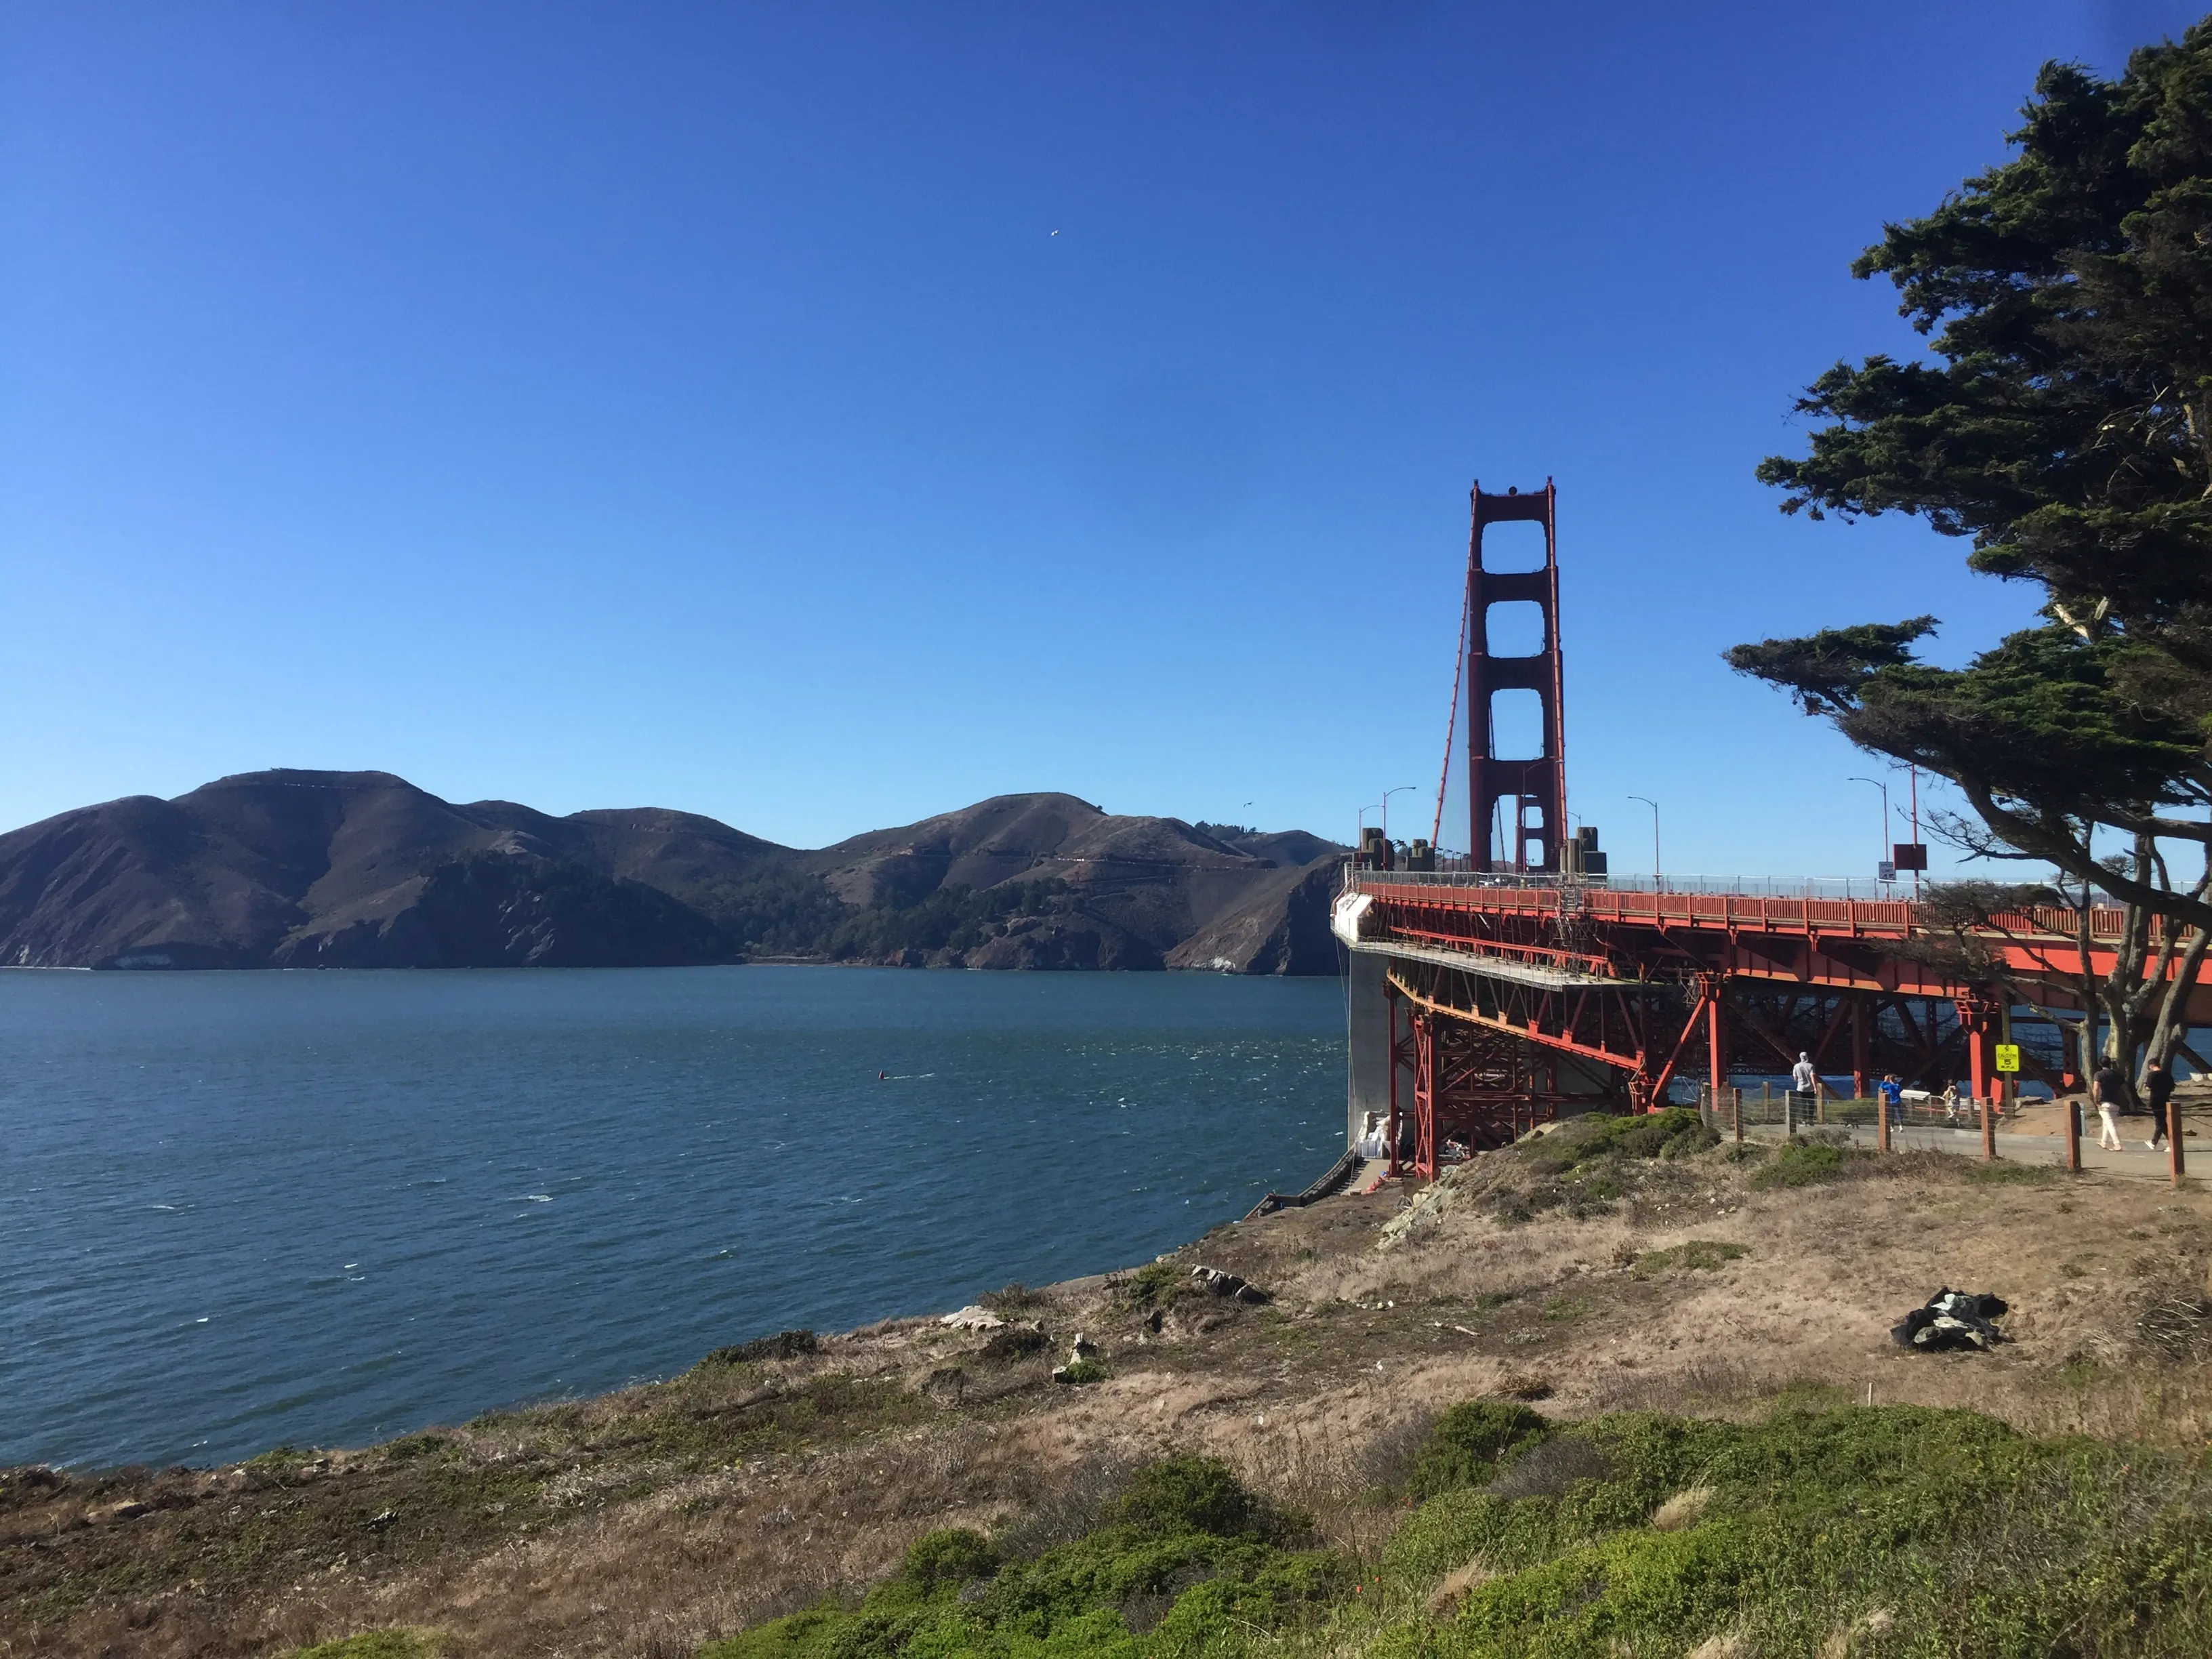 A picture of the Golden Gate Bridge that I took! Pretty nice, eh?